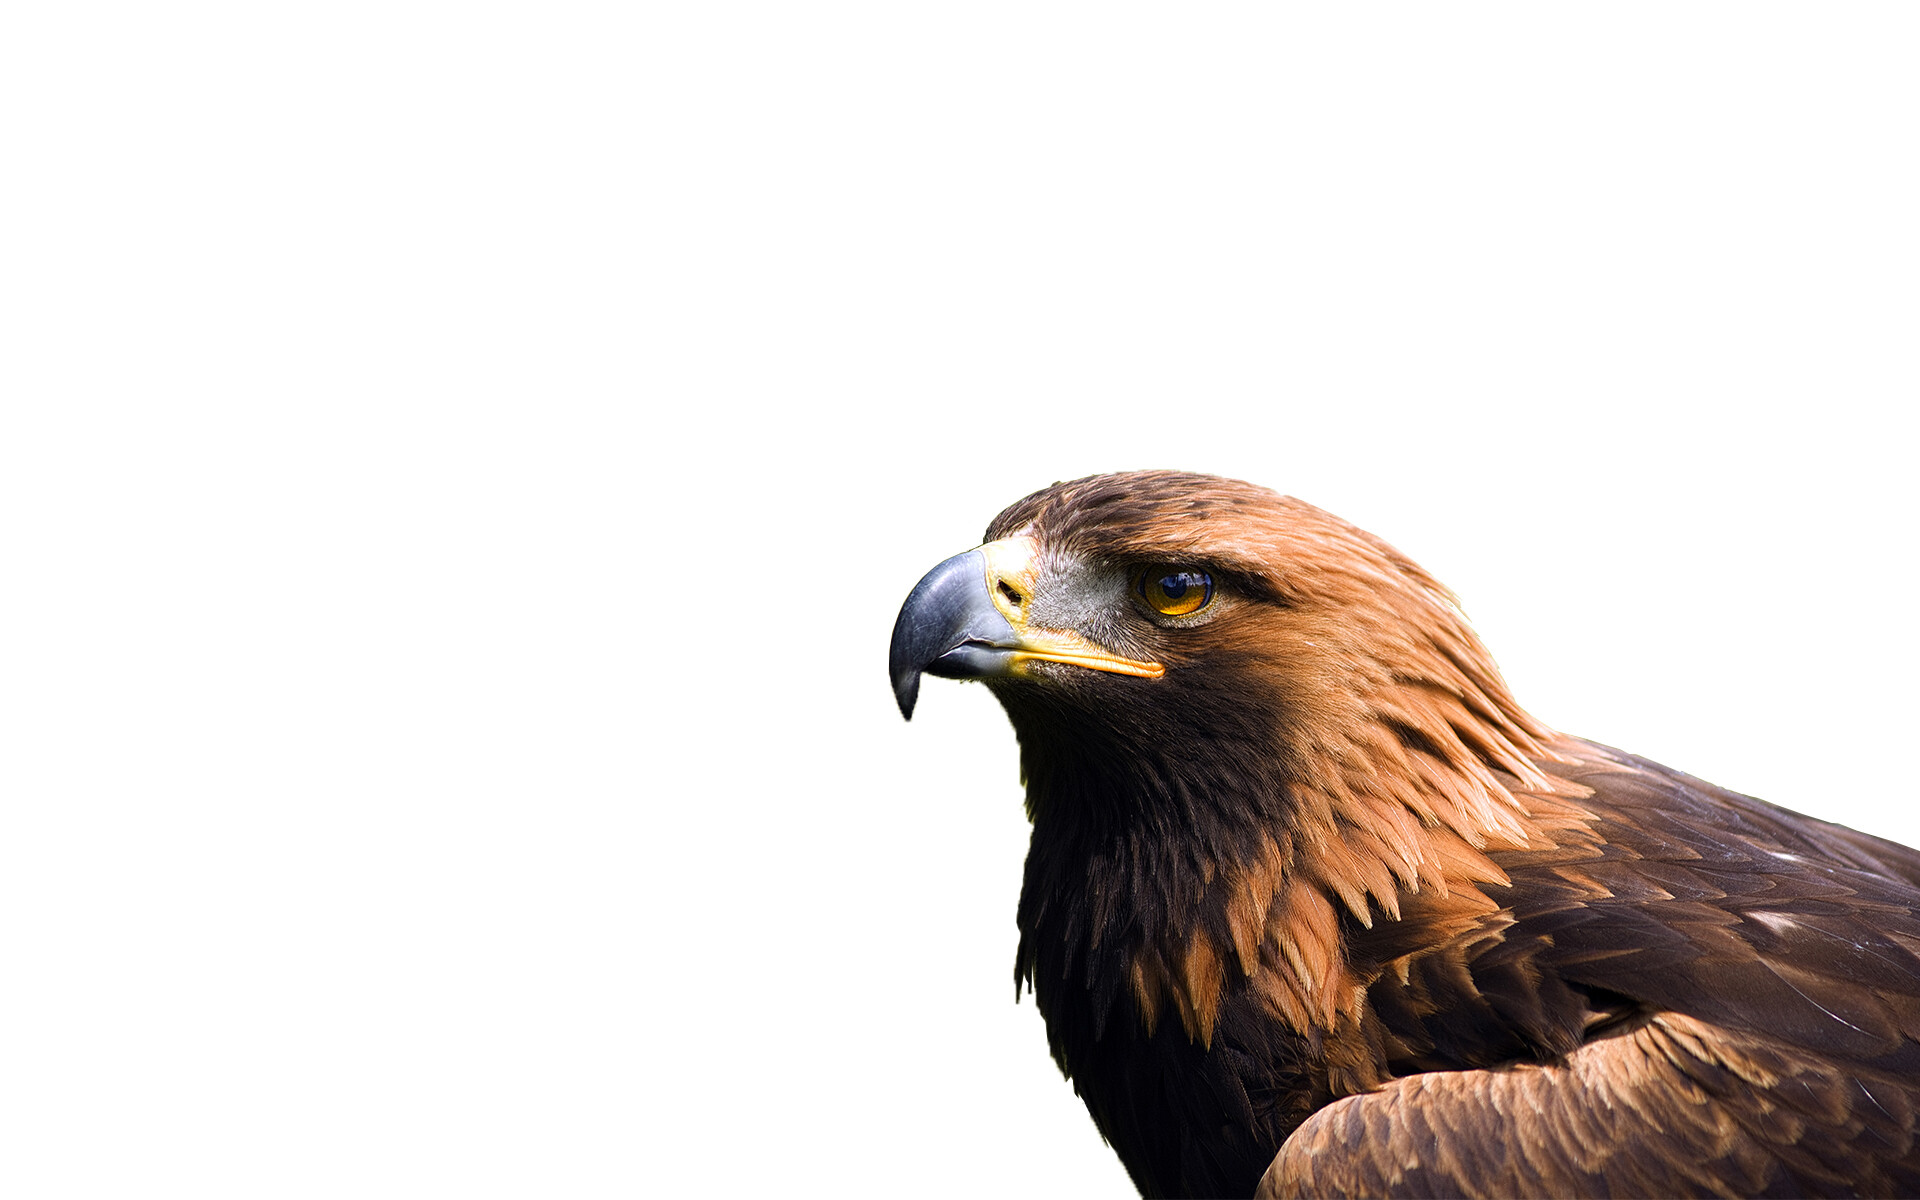 Golden Eagle: Dark brown eagle's plumage, A massive bird with broad rounded wings, The striking golden head and neck. 1920x1200 HD Wallpaper.